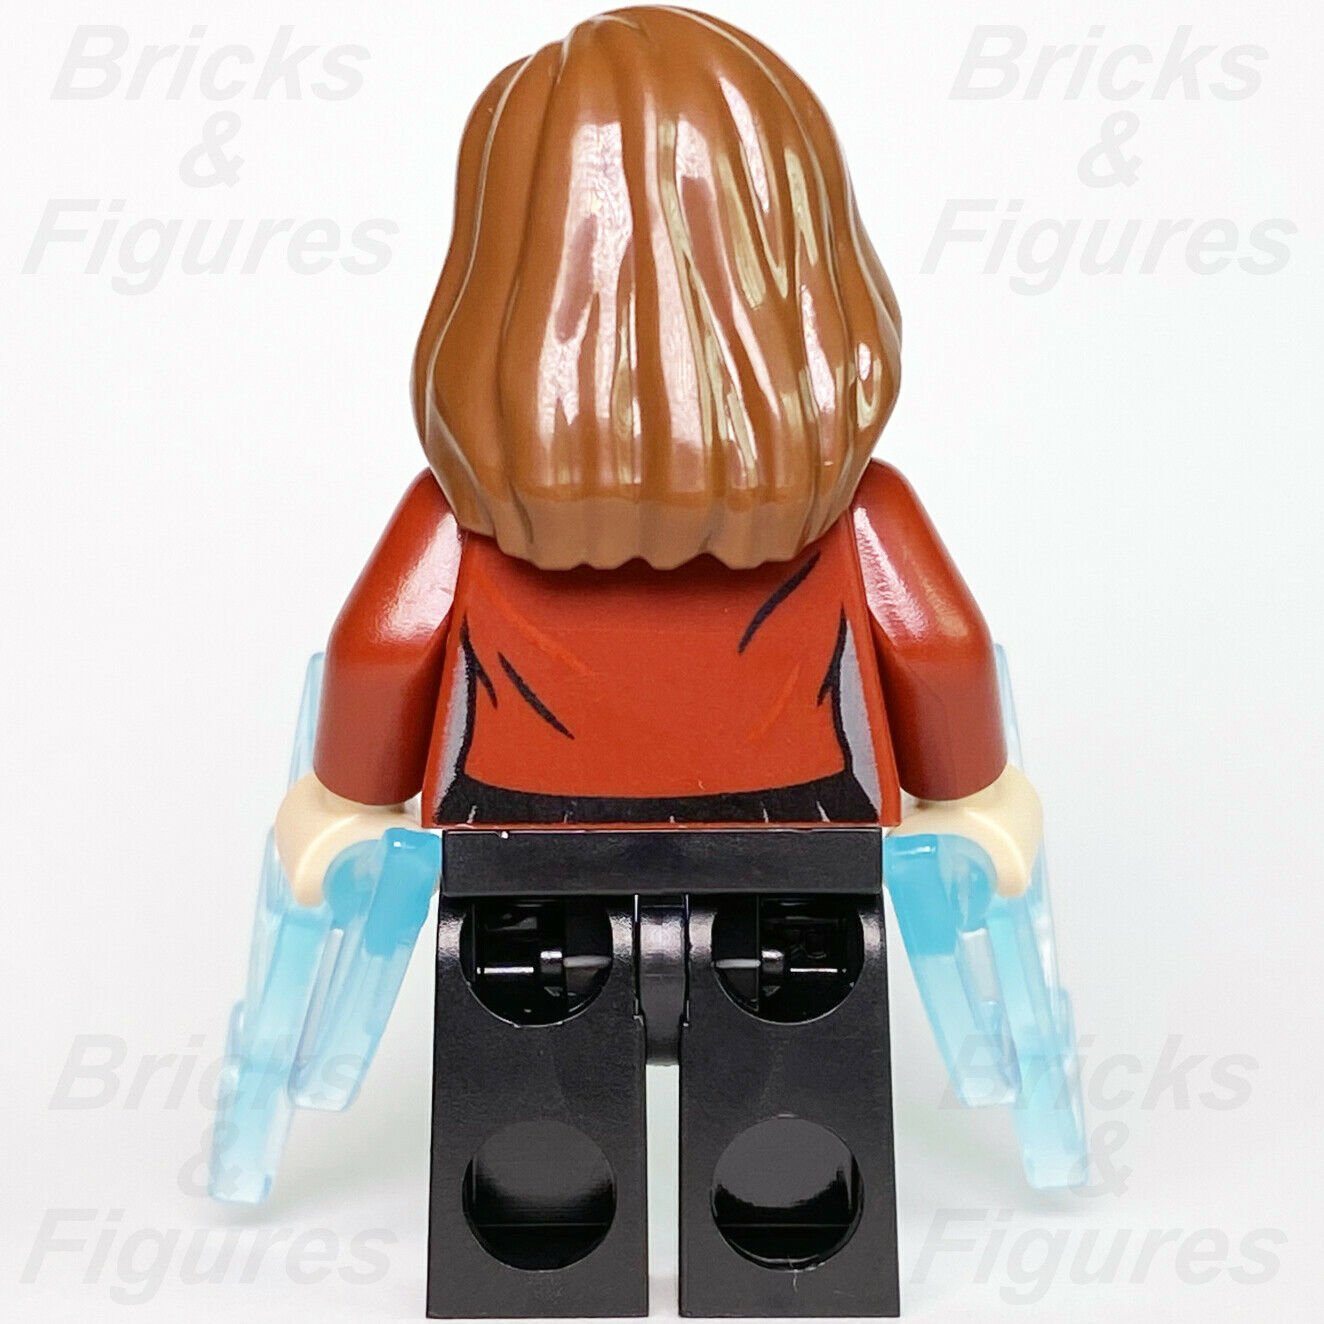 Marvel Super Heroes LEGO Scarlet Witch Avengers Age of Ultron Minifigure 76031 - Bricks & Figures